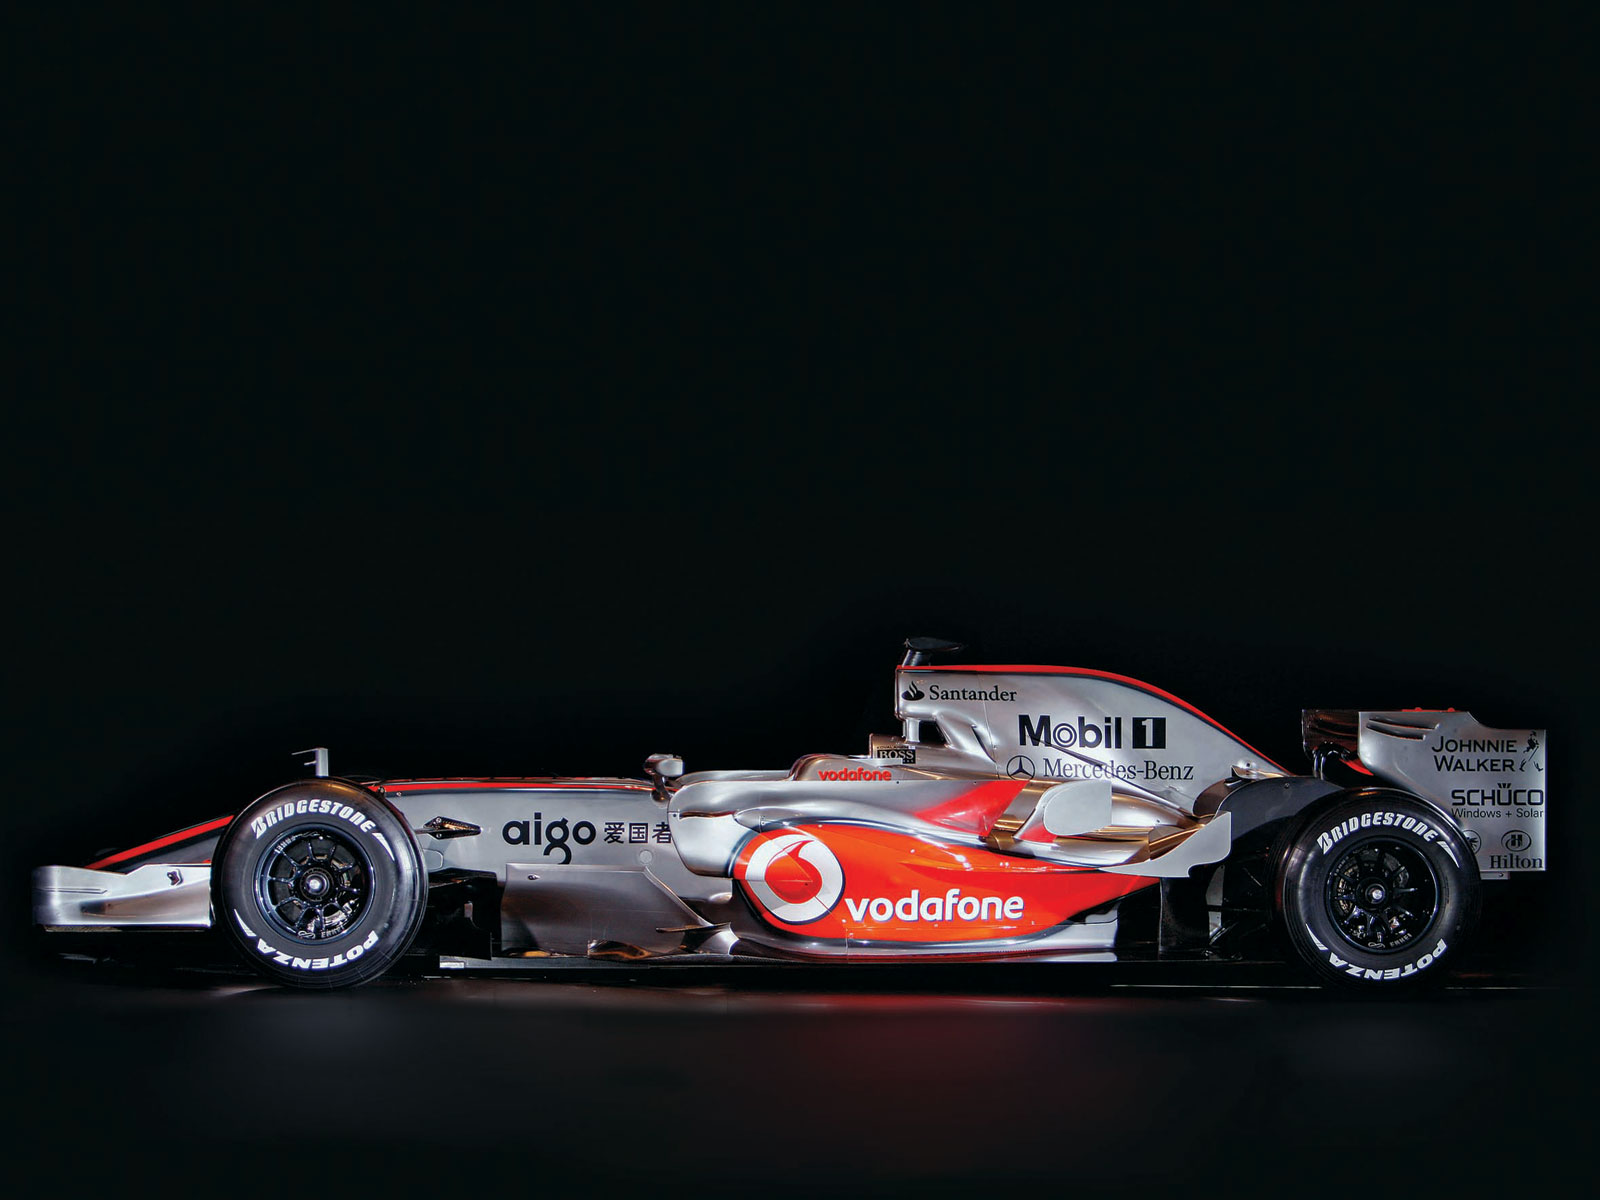 You can vote for this McLaren MP4-23 photo